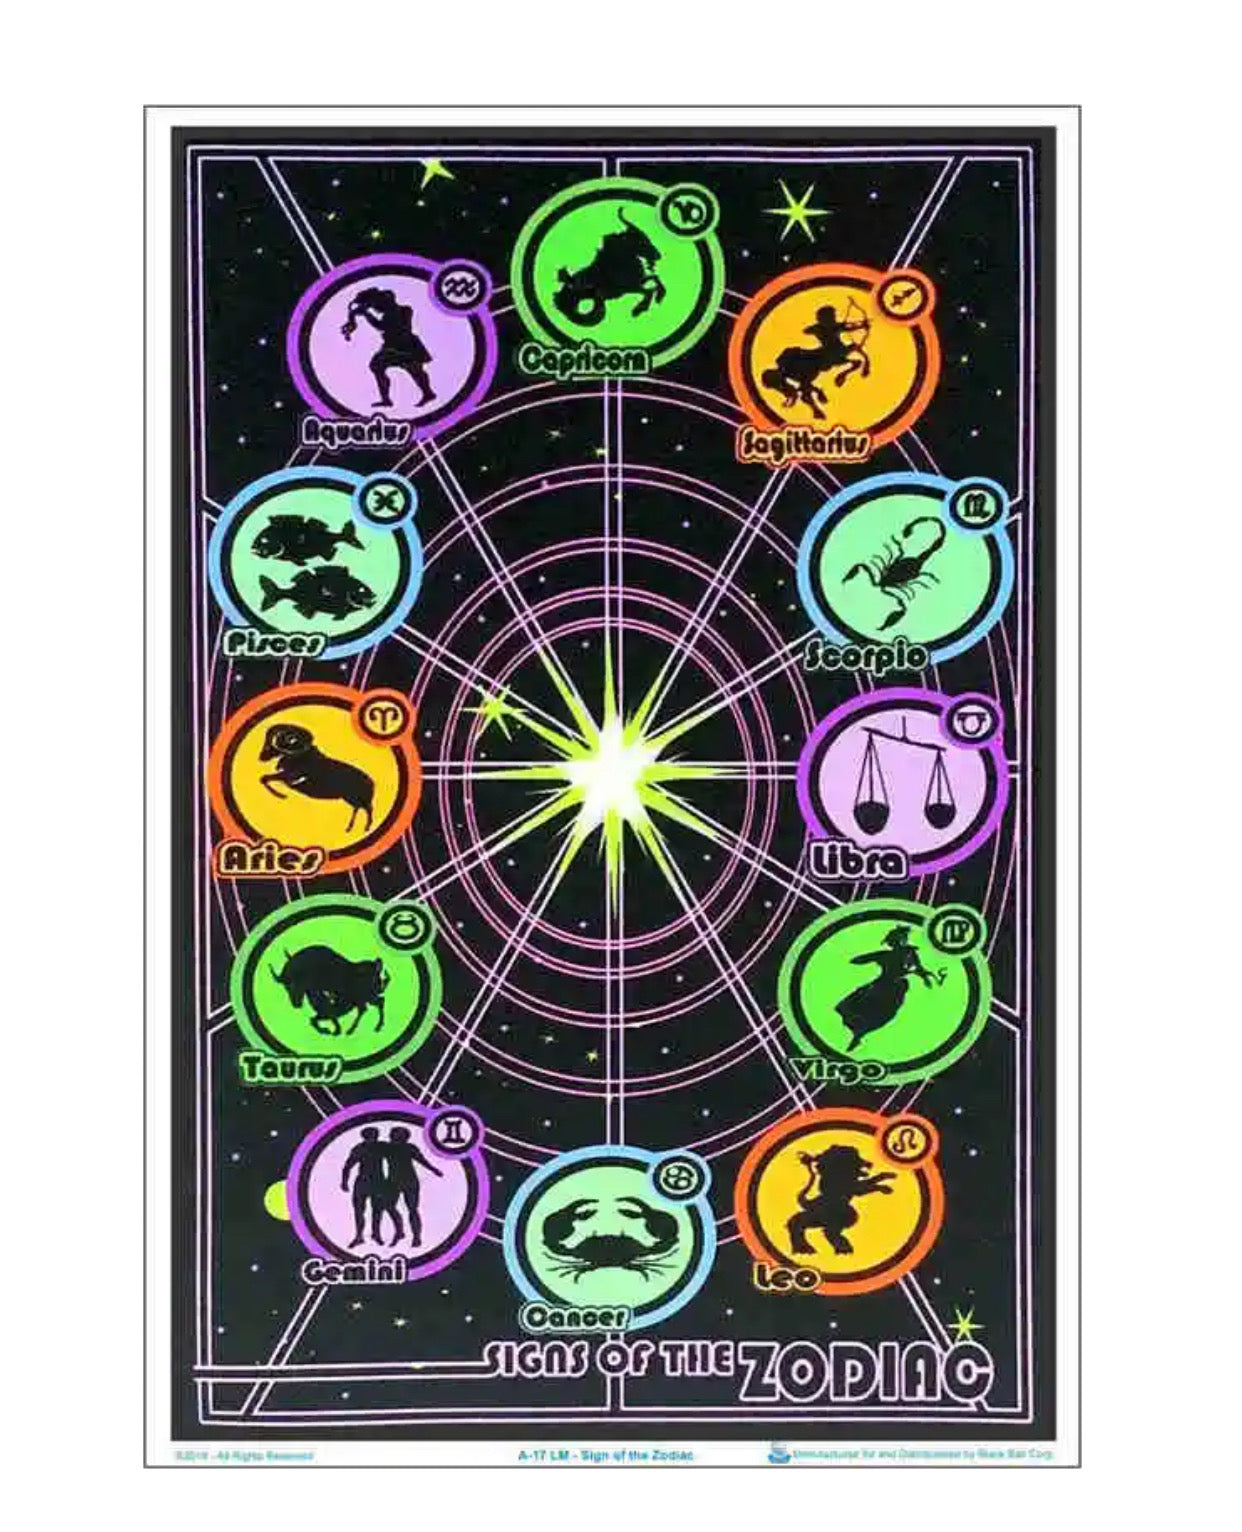 " signs of the zodiac" poster